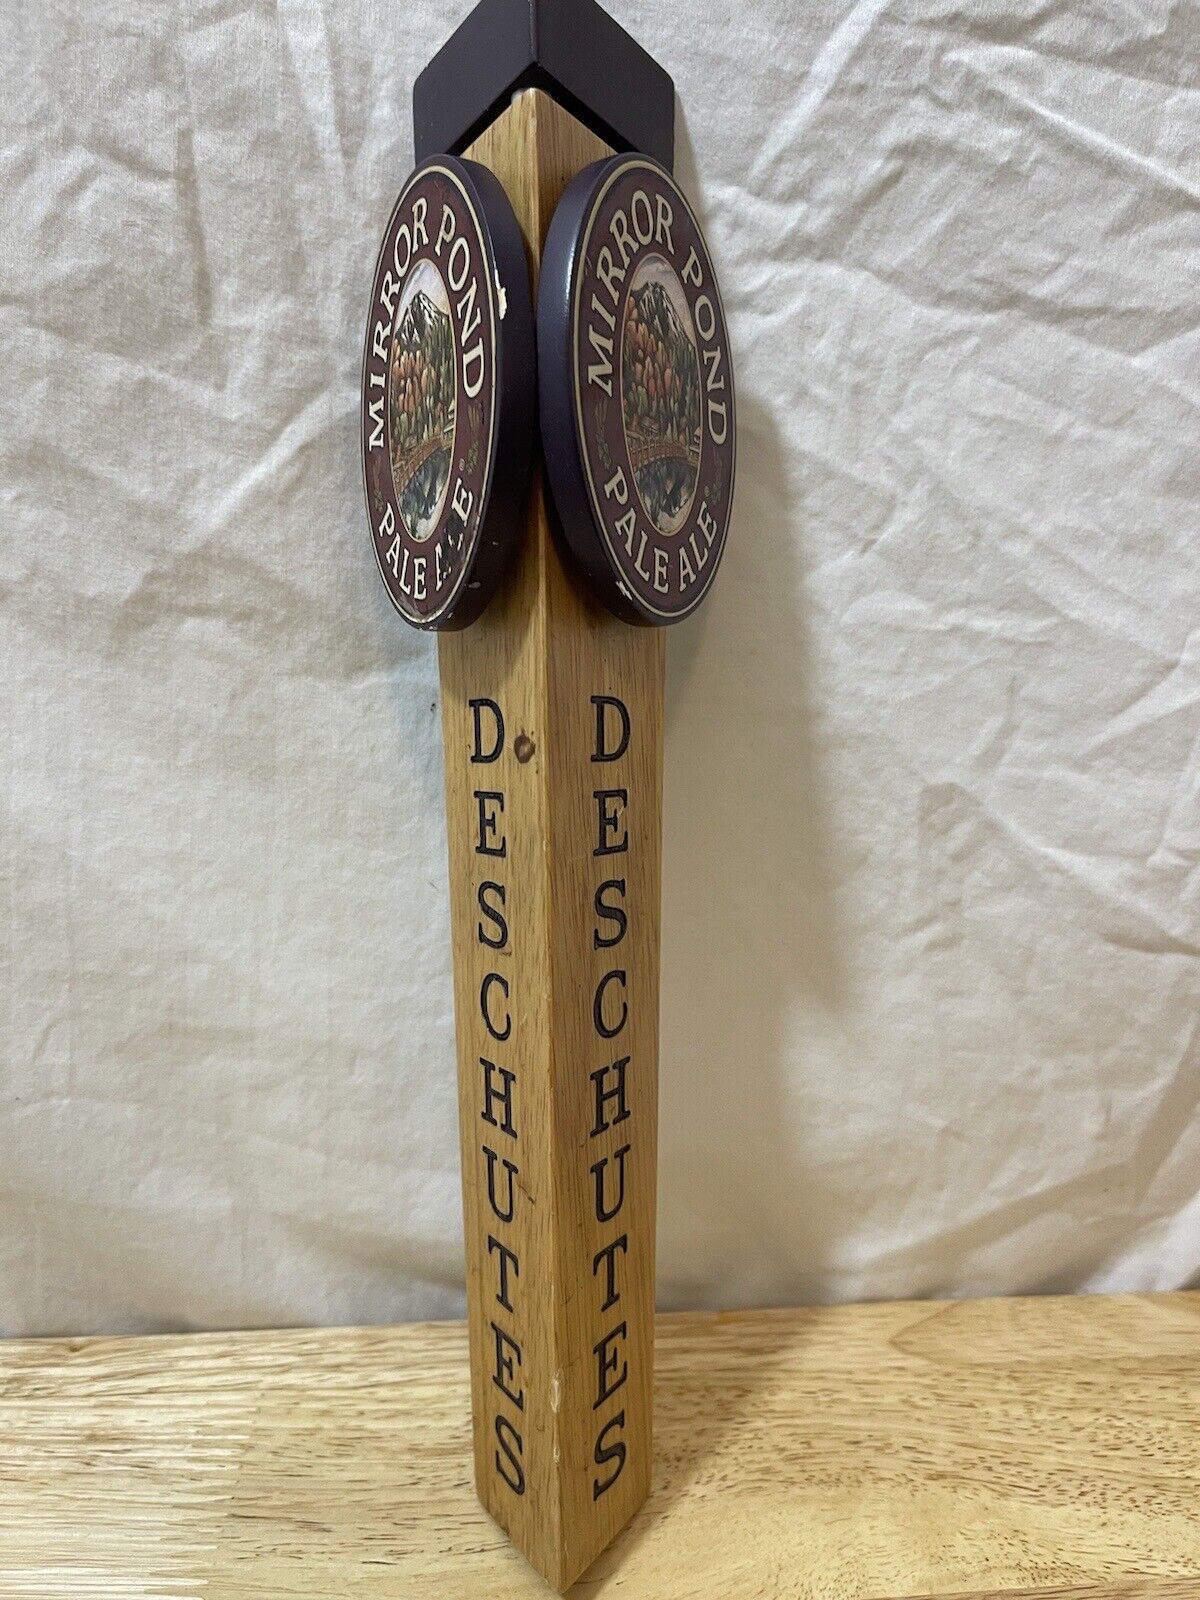 DESCHUTES MIRROR POND PALE ALE BEER TAP HANDLE 3 SIDED